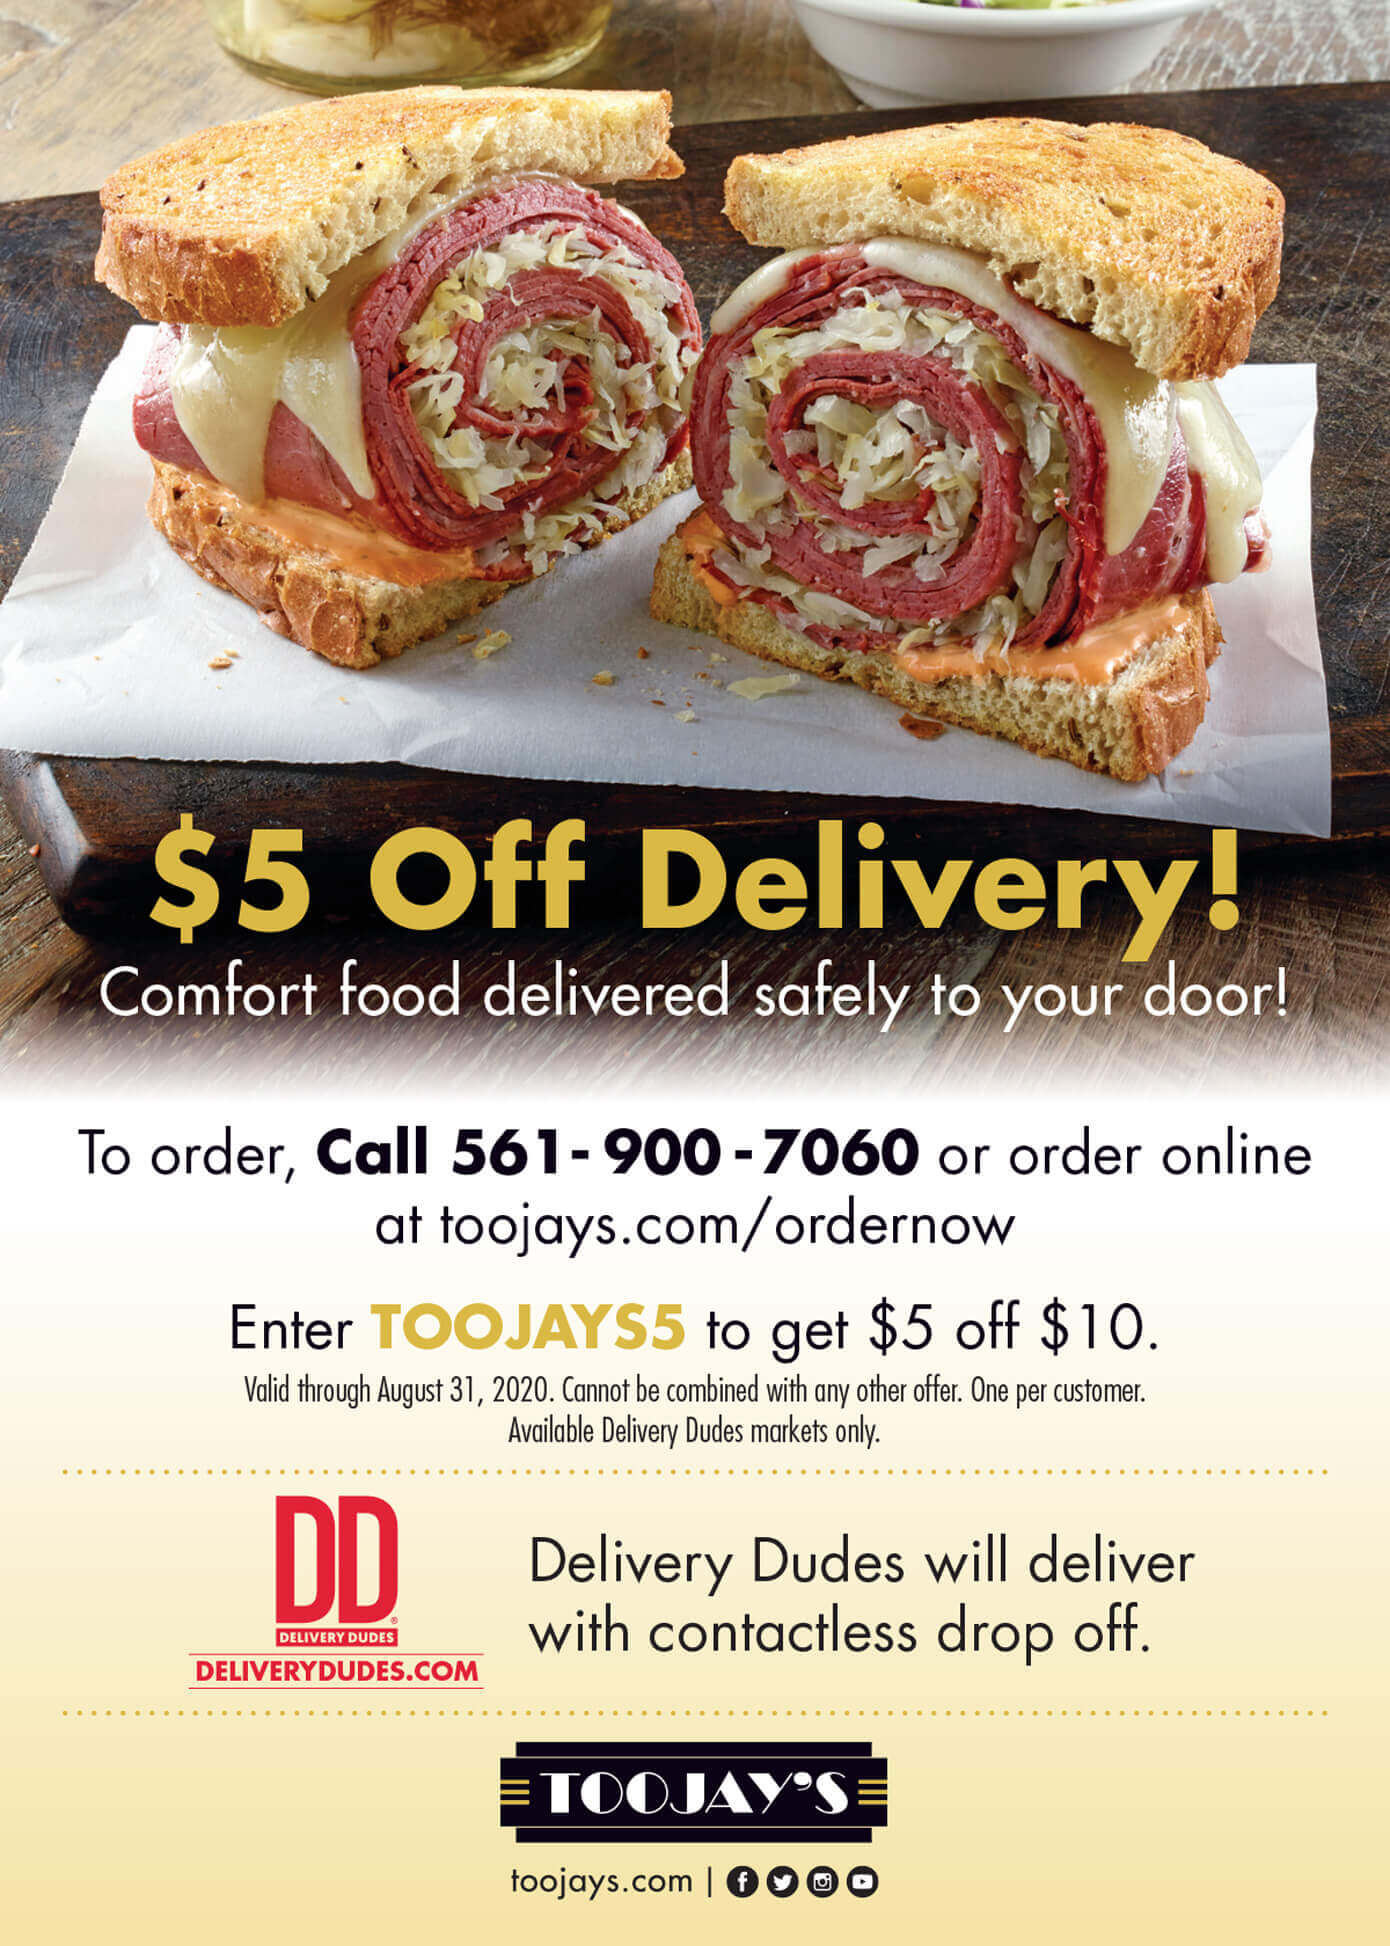 $5 Off Delivery! Comfort food delivered safely to your door! Click here for code! To order, Call 561-900-7060 or order online at toojays.com/ordernow. Enter TOOJAYS5 to get $5 off $10. Valid through August 31, 2020. Cannot be combined with any other offer. One per customer. Available Delivery Dudes markets only.